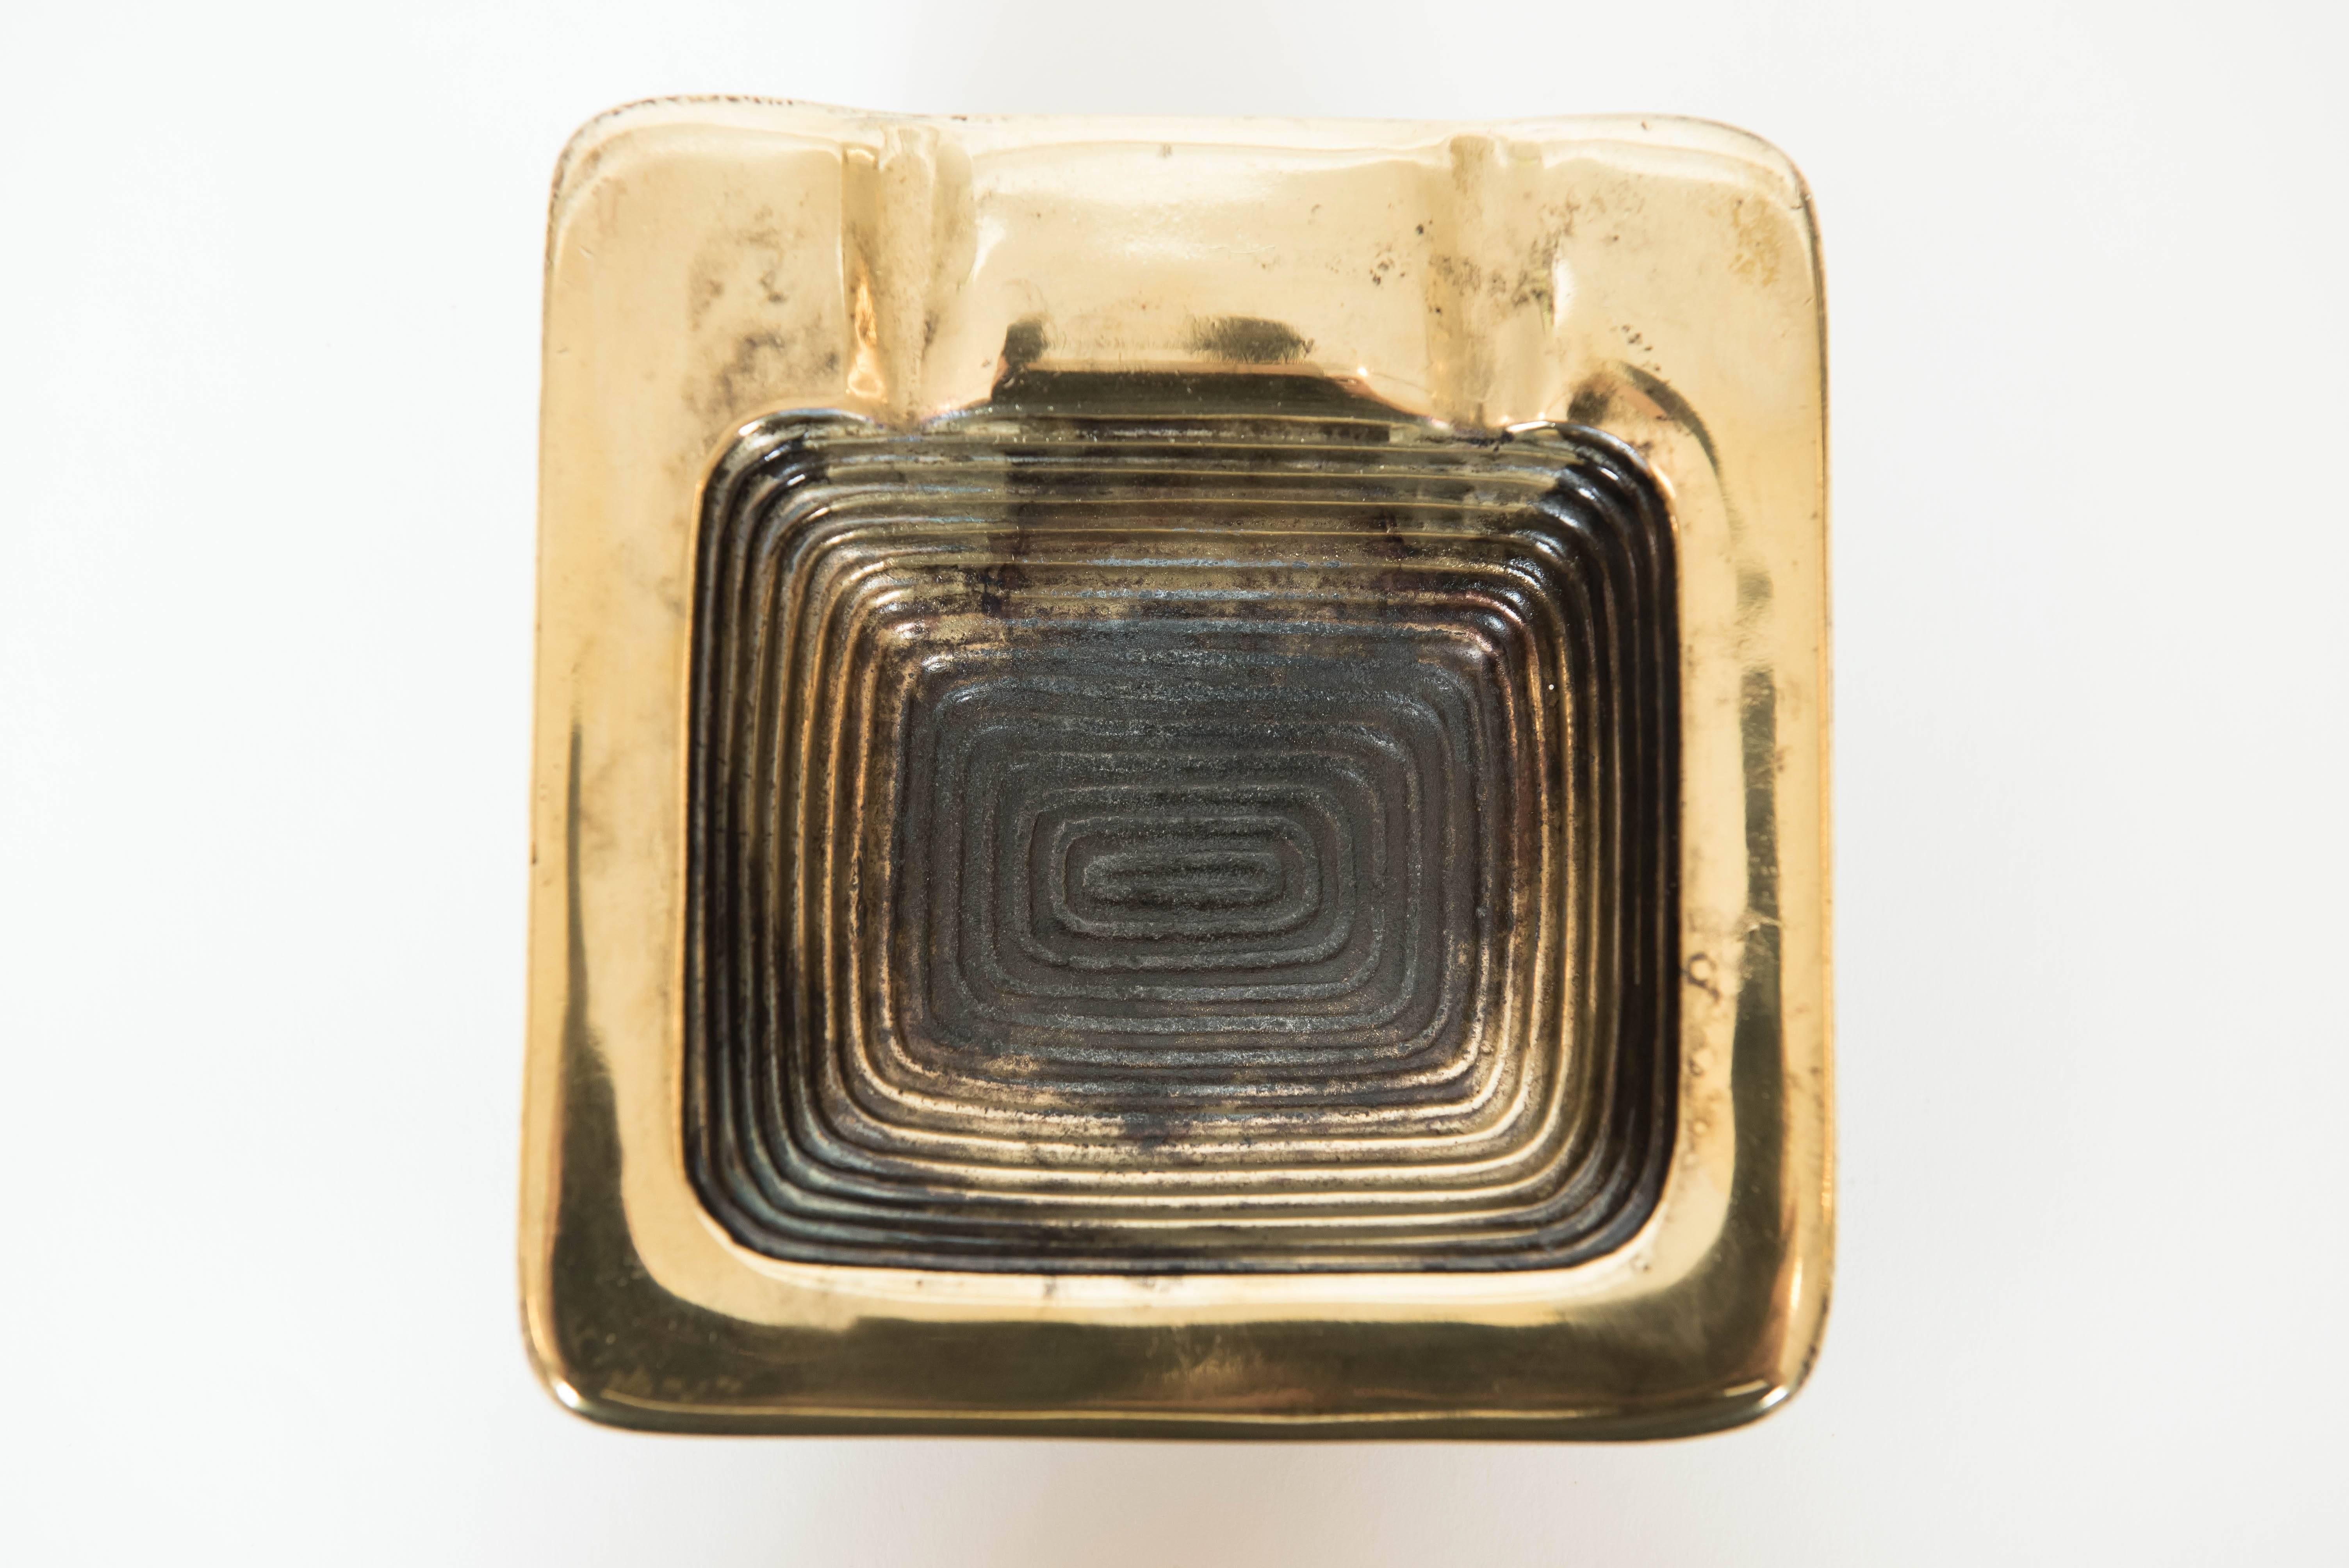 This ribbed Ben Seibel sculptural ashtray in antique brass finish adds panache to many a room!